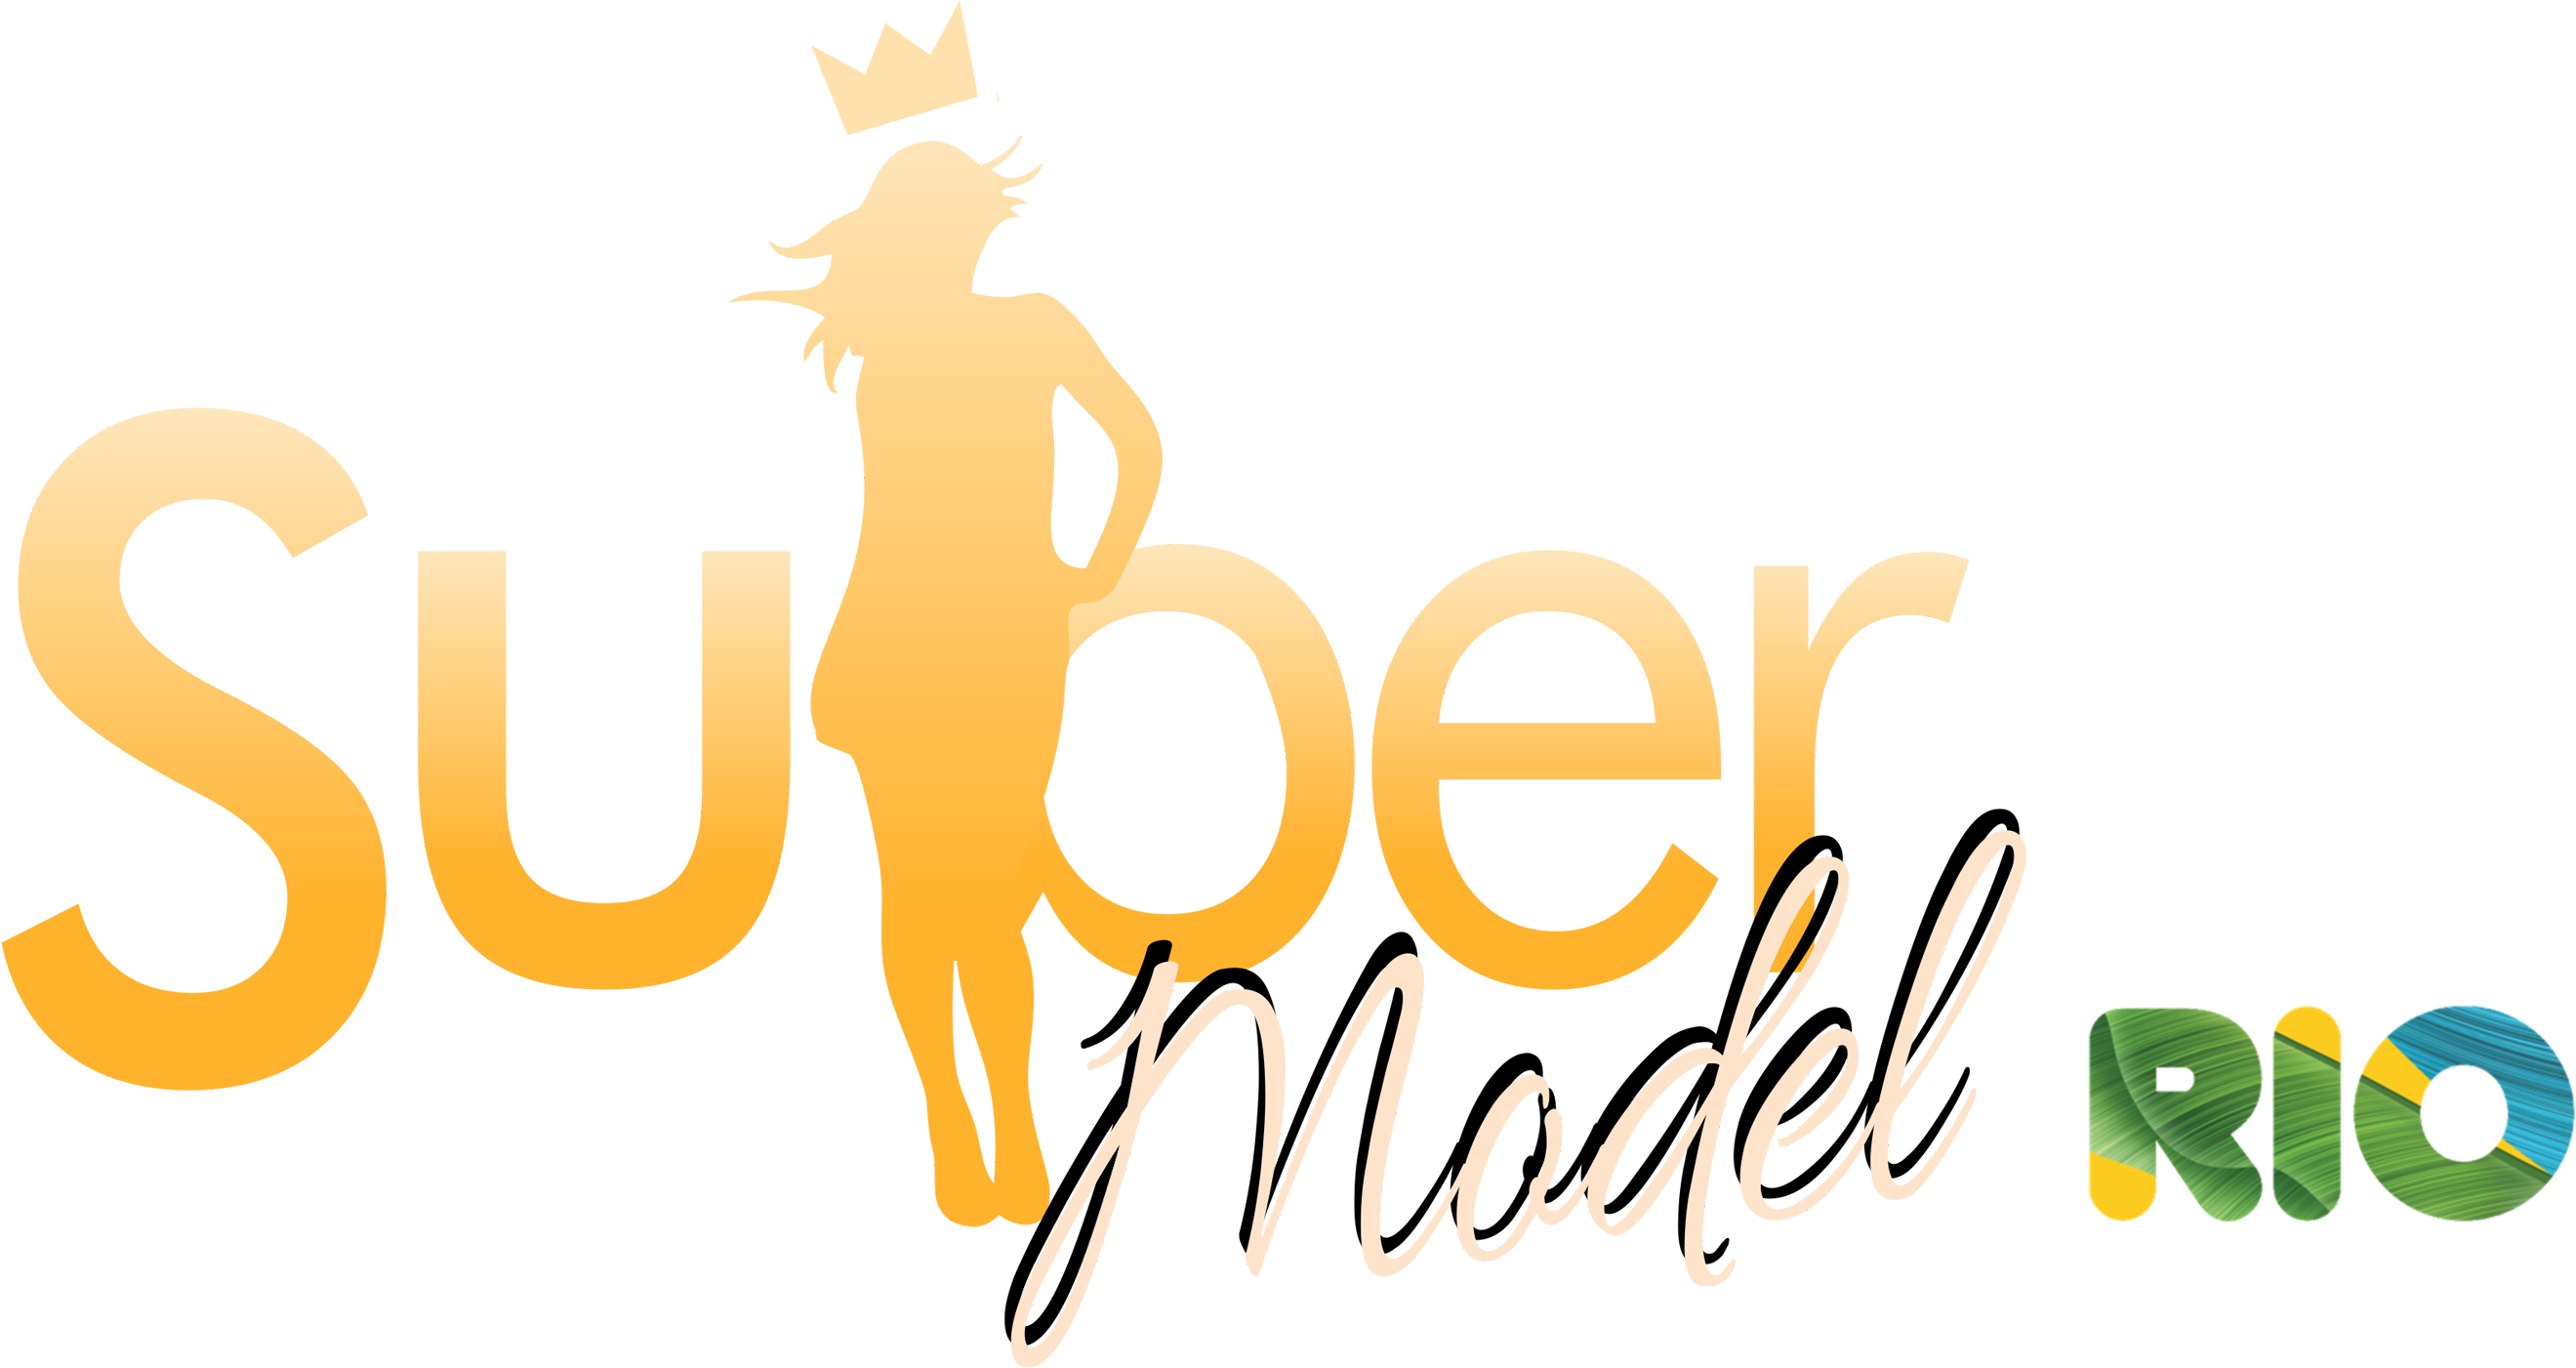 A Logo Of A Woman With A Crown